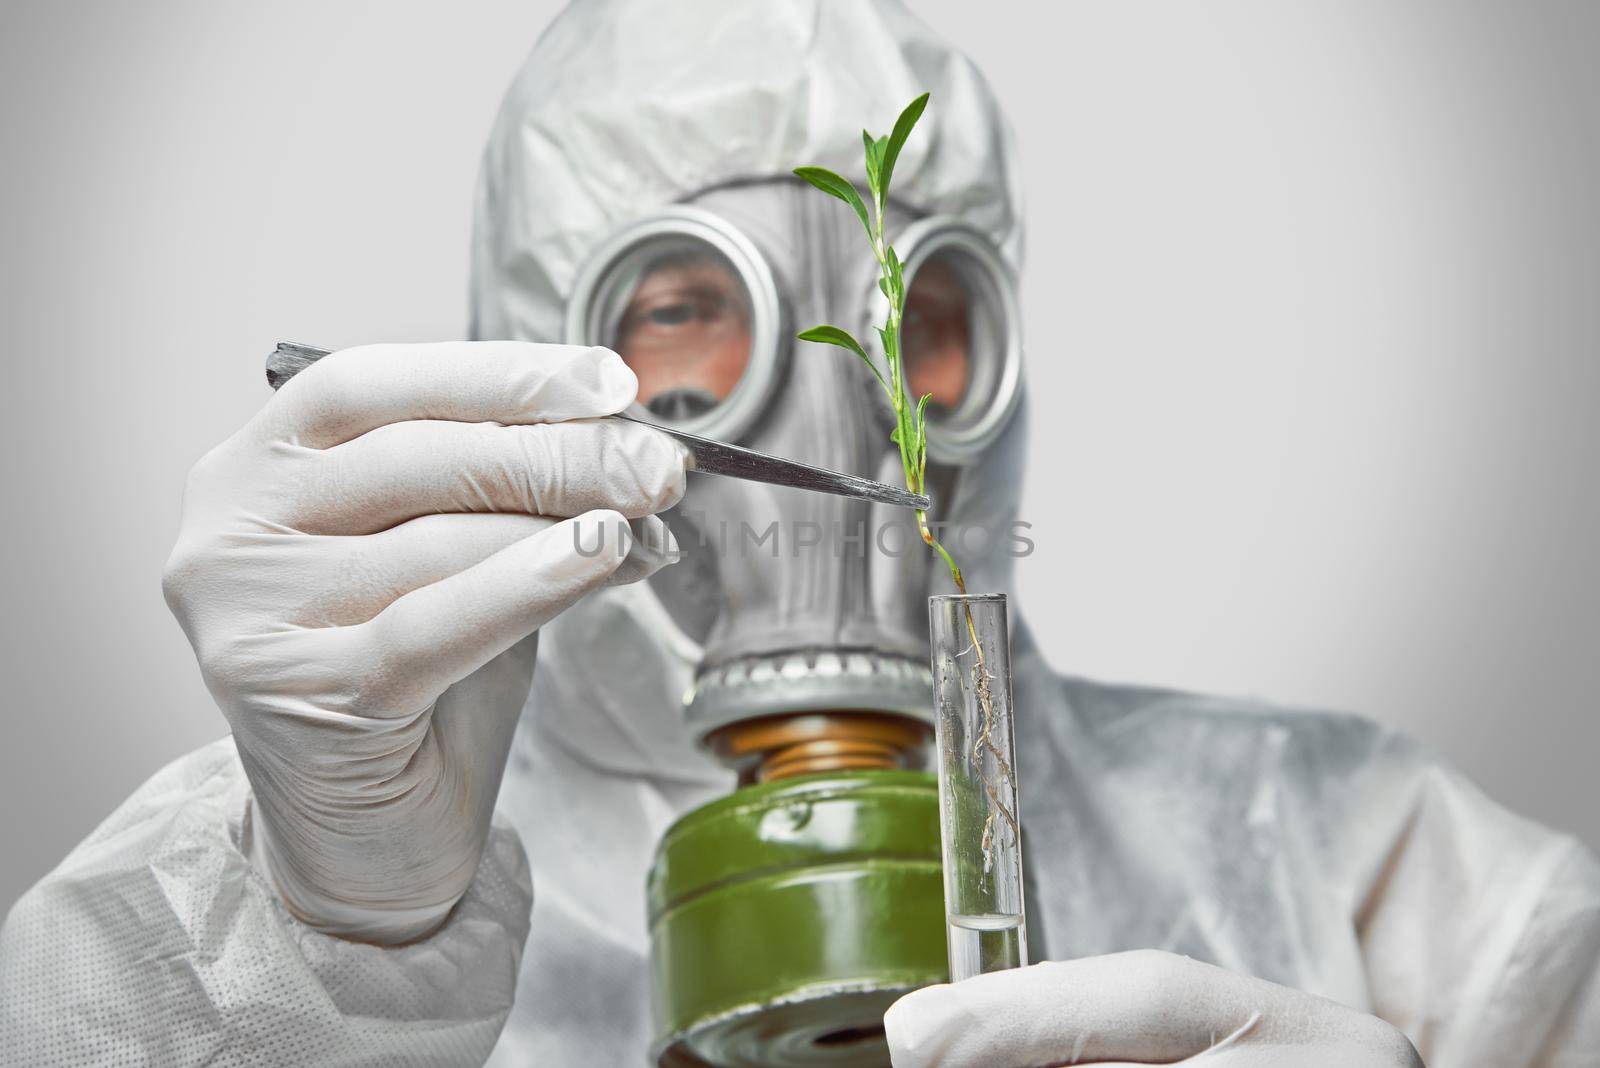 Scientist in protective uniform and respirator puts green plant in flask with tweezers